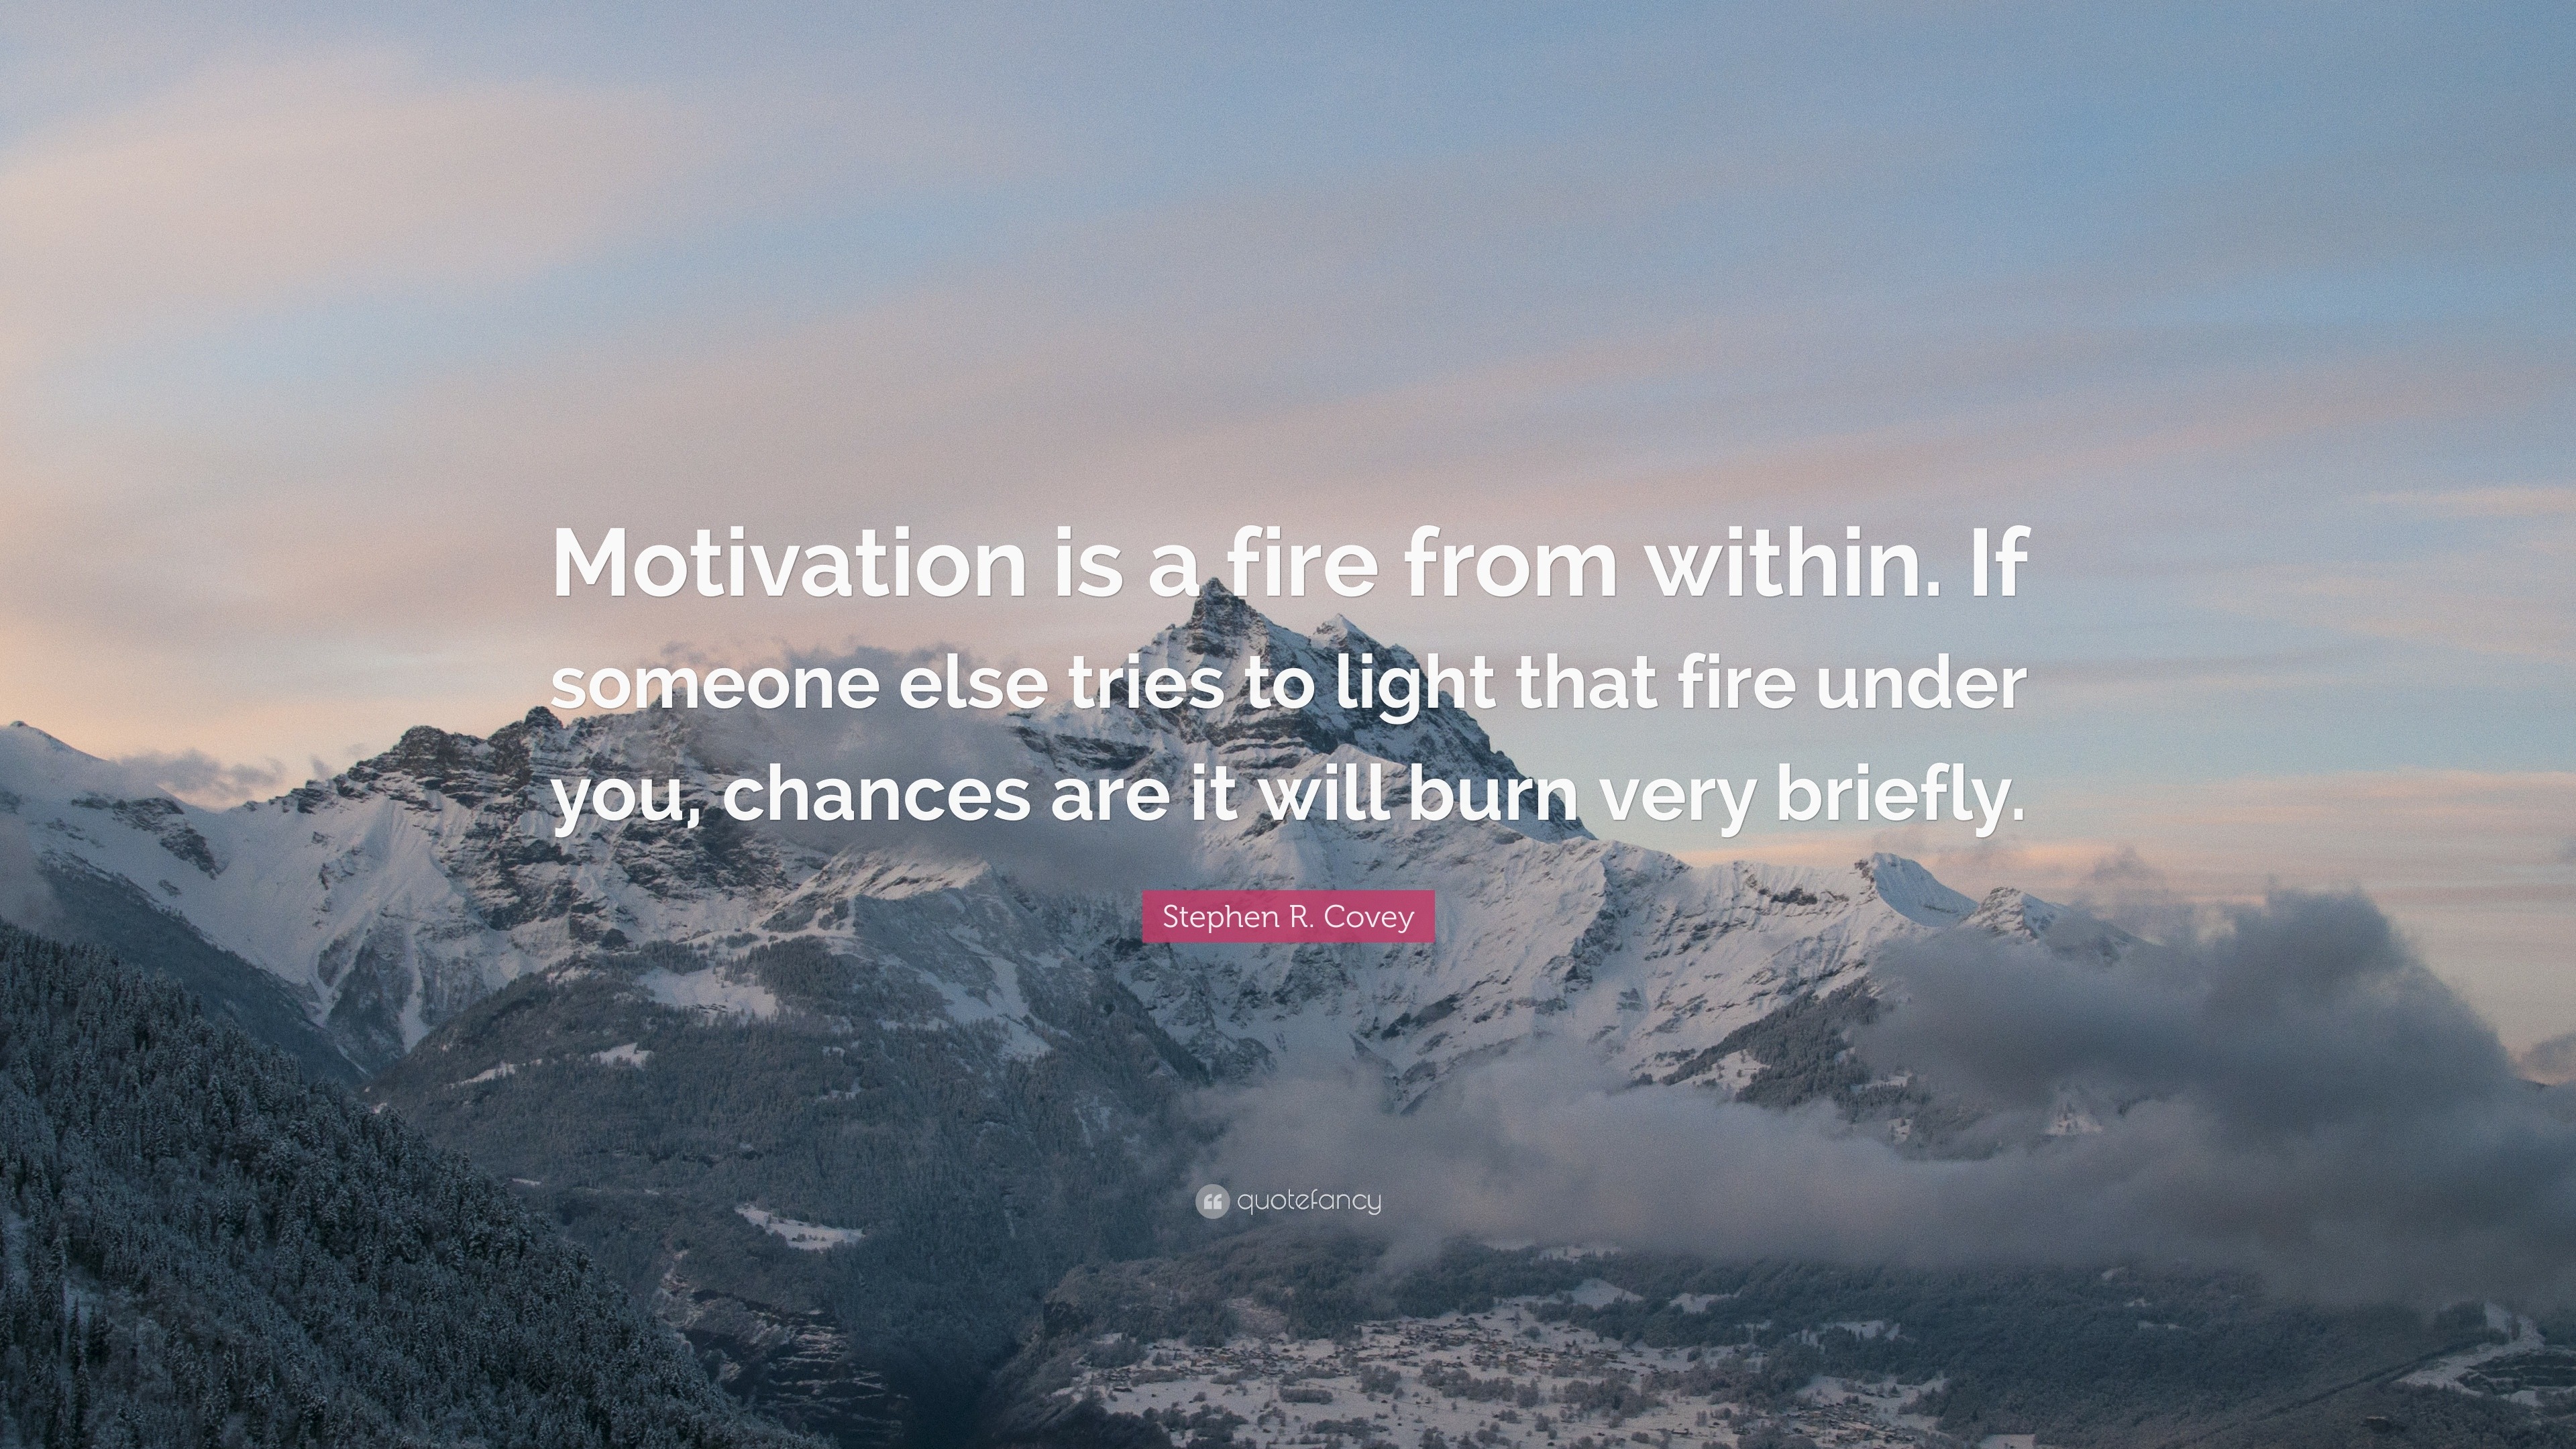 Stephen R. Covey Quote: “Motivation is a fire from within. If someone